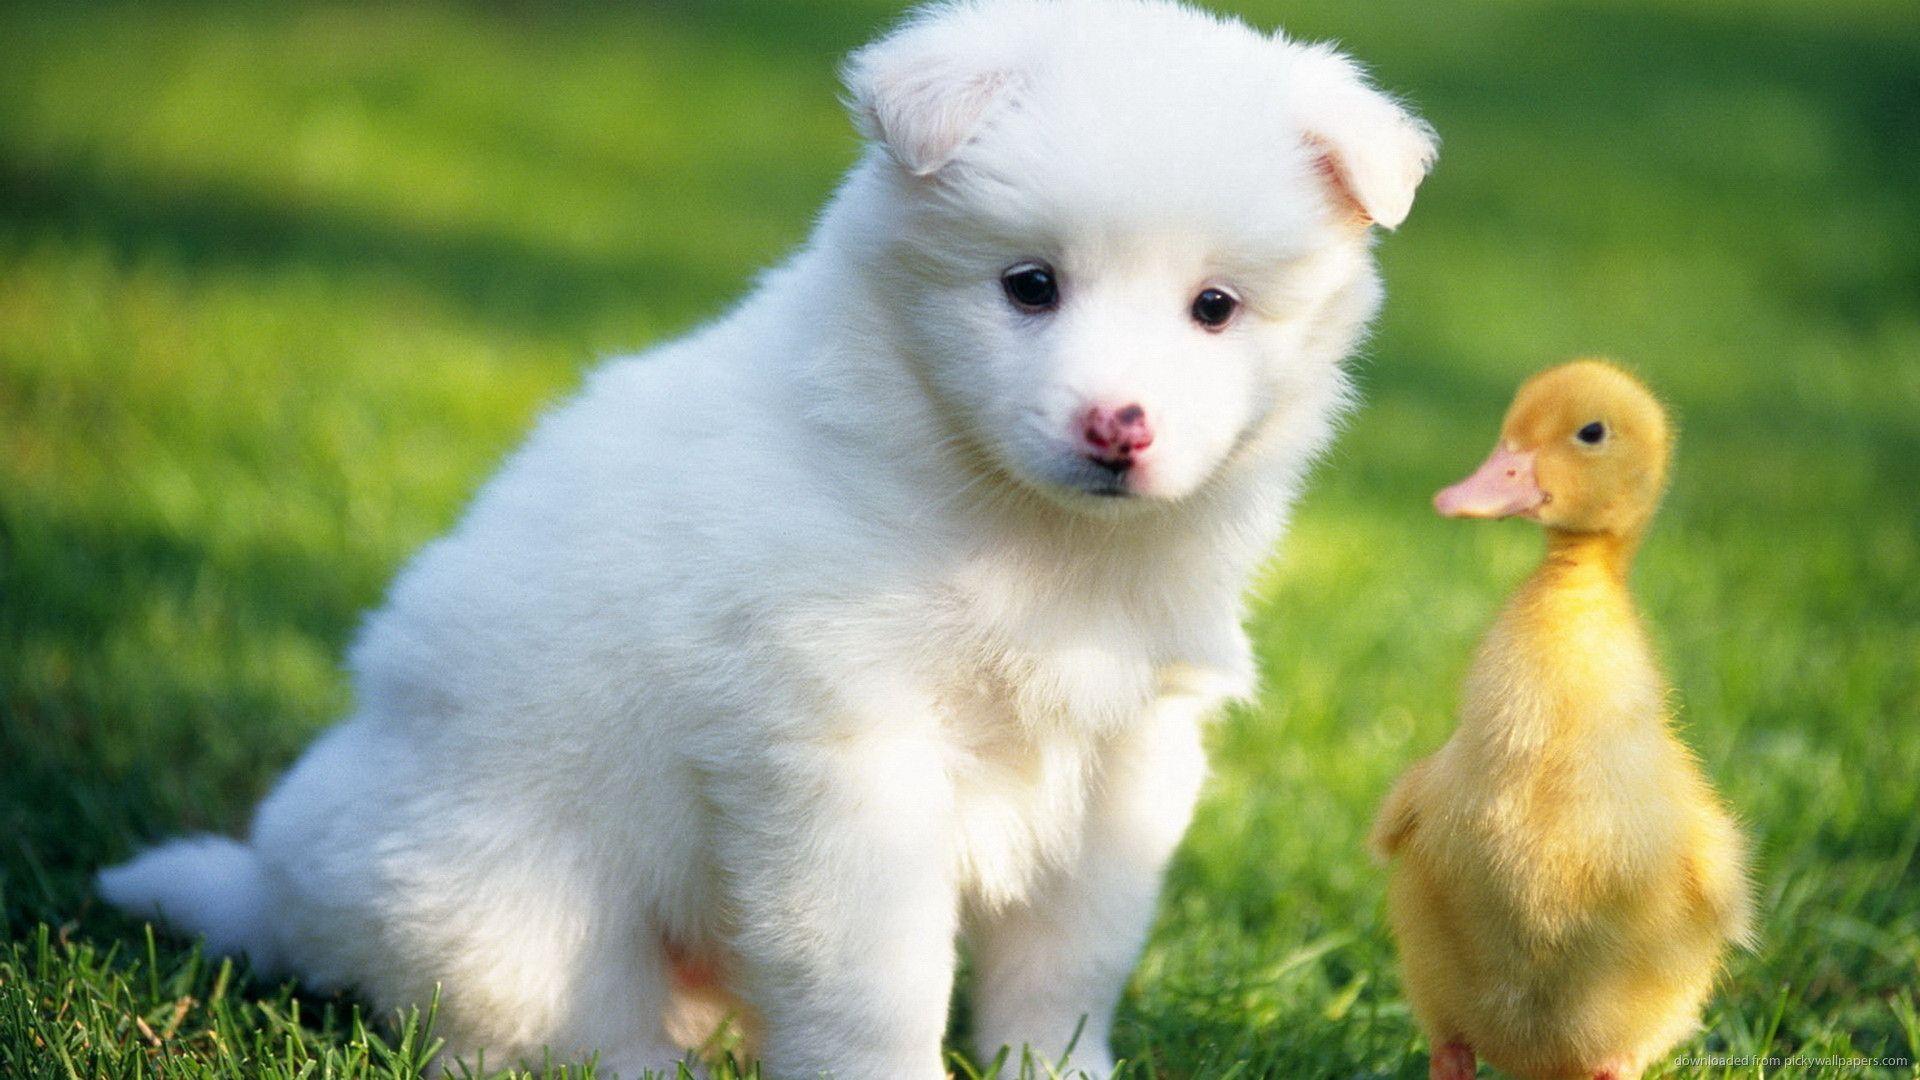 Puppy And A Duckling Wallpapers For iPad 2